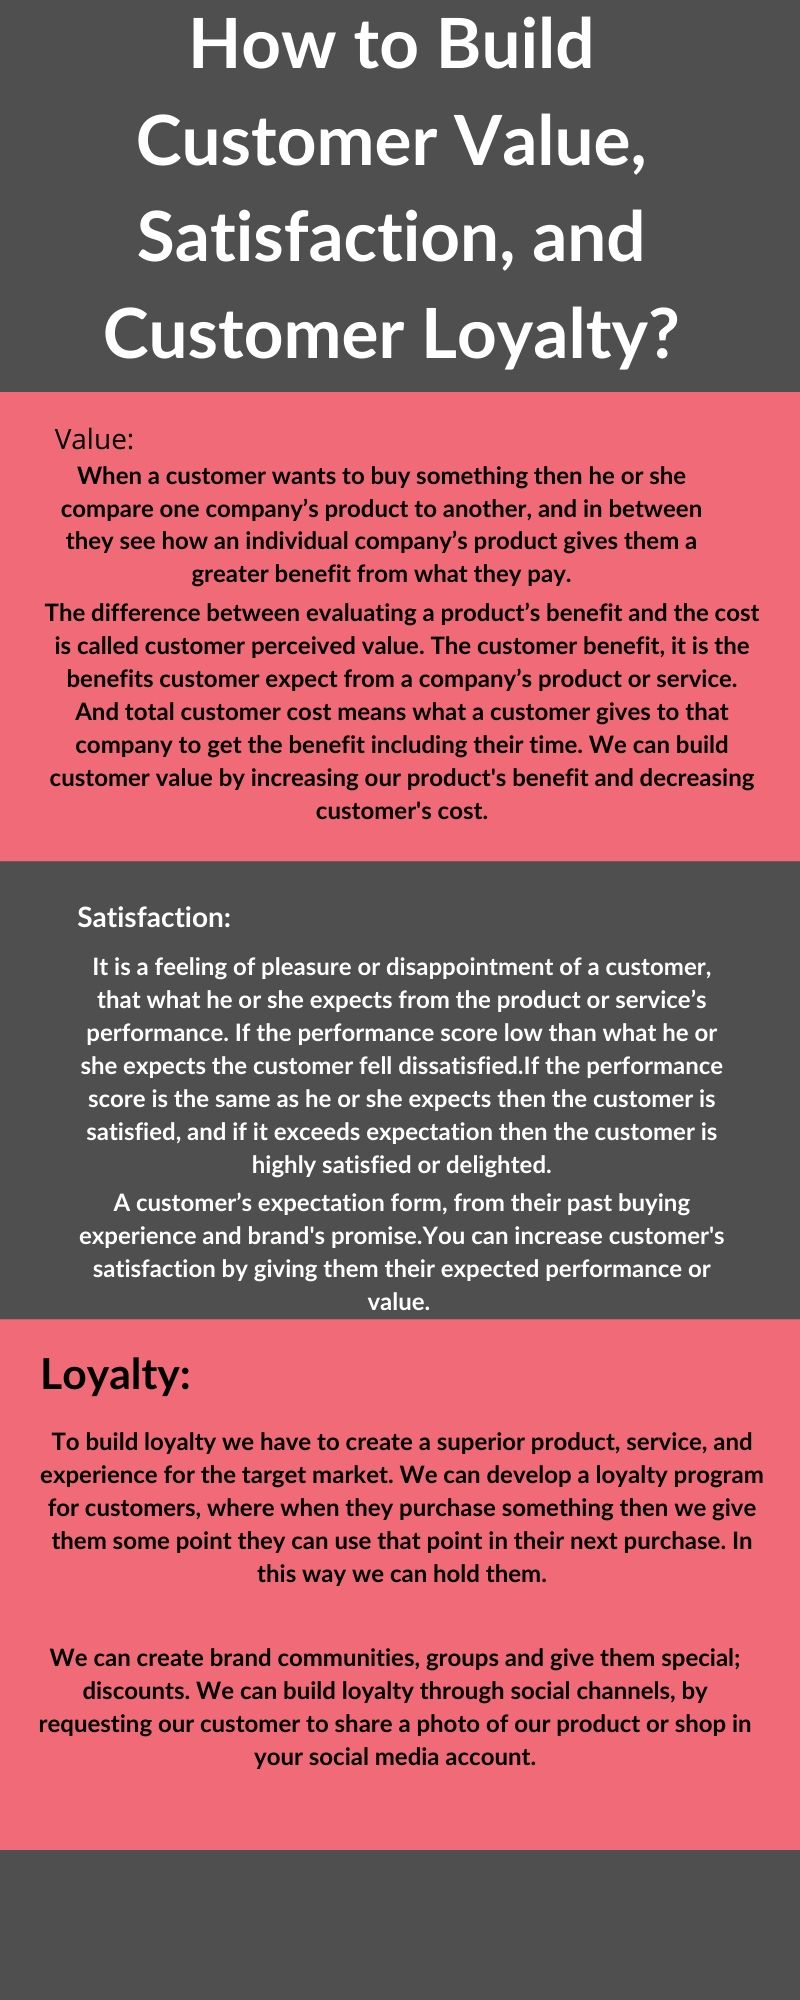 Infographic of customer loyalty.